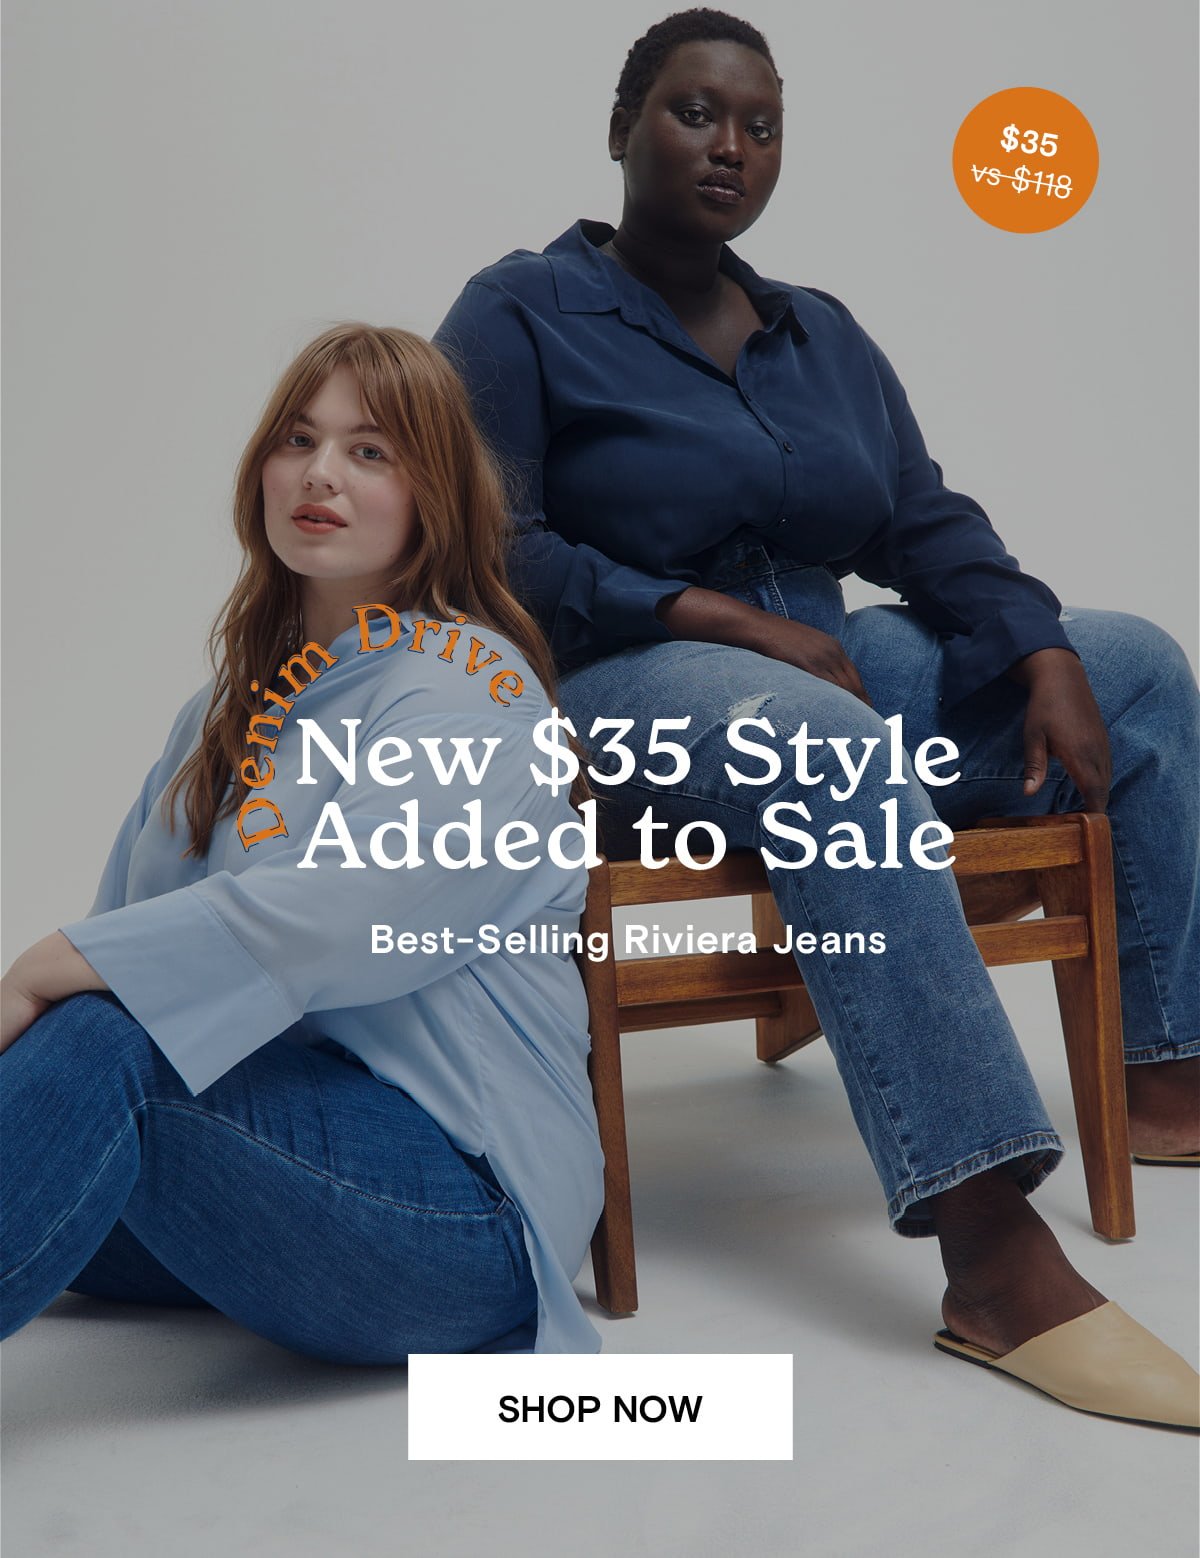 New $35 style added to sale